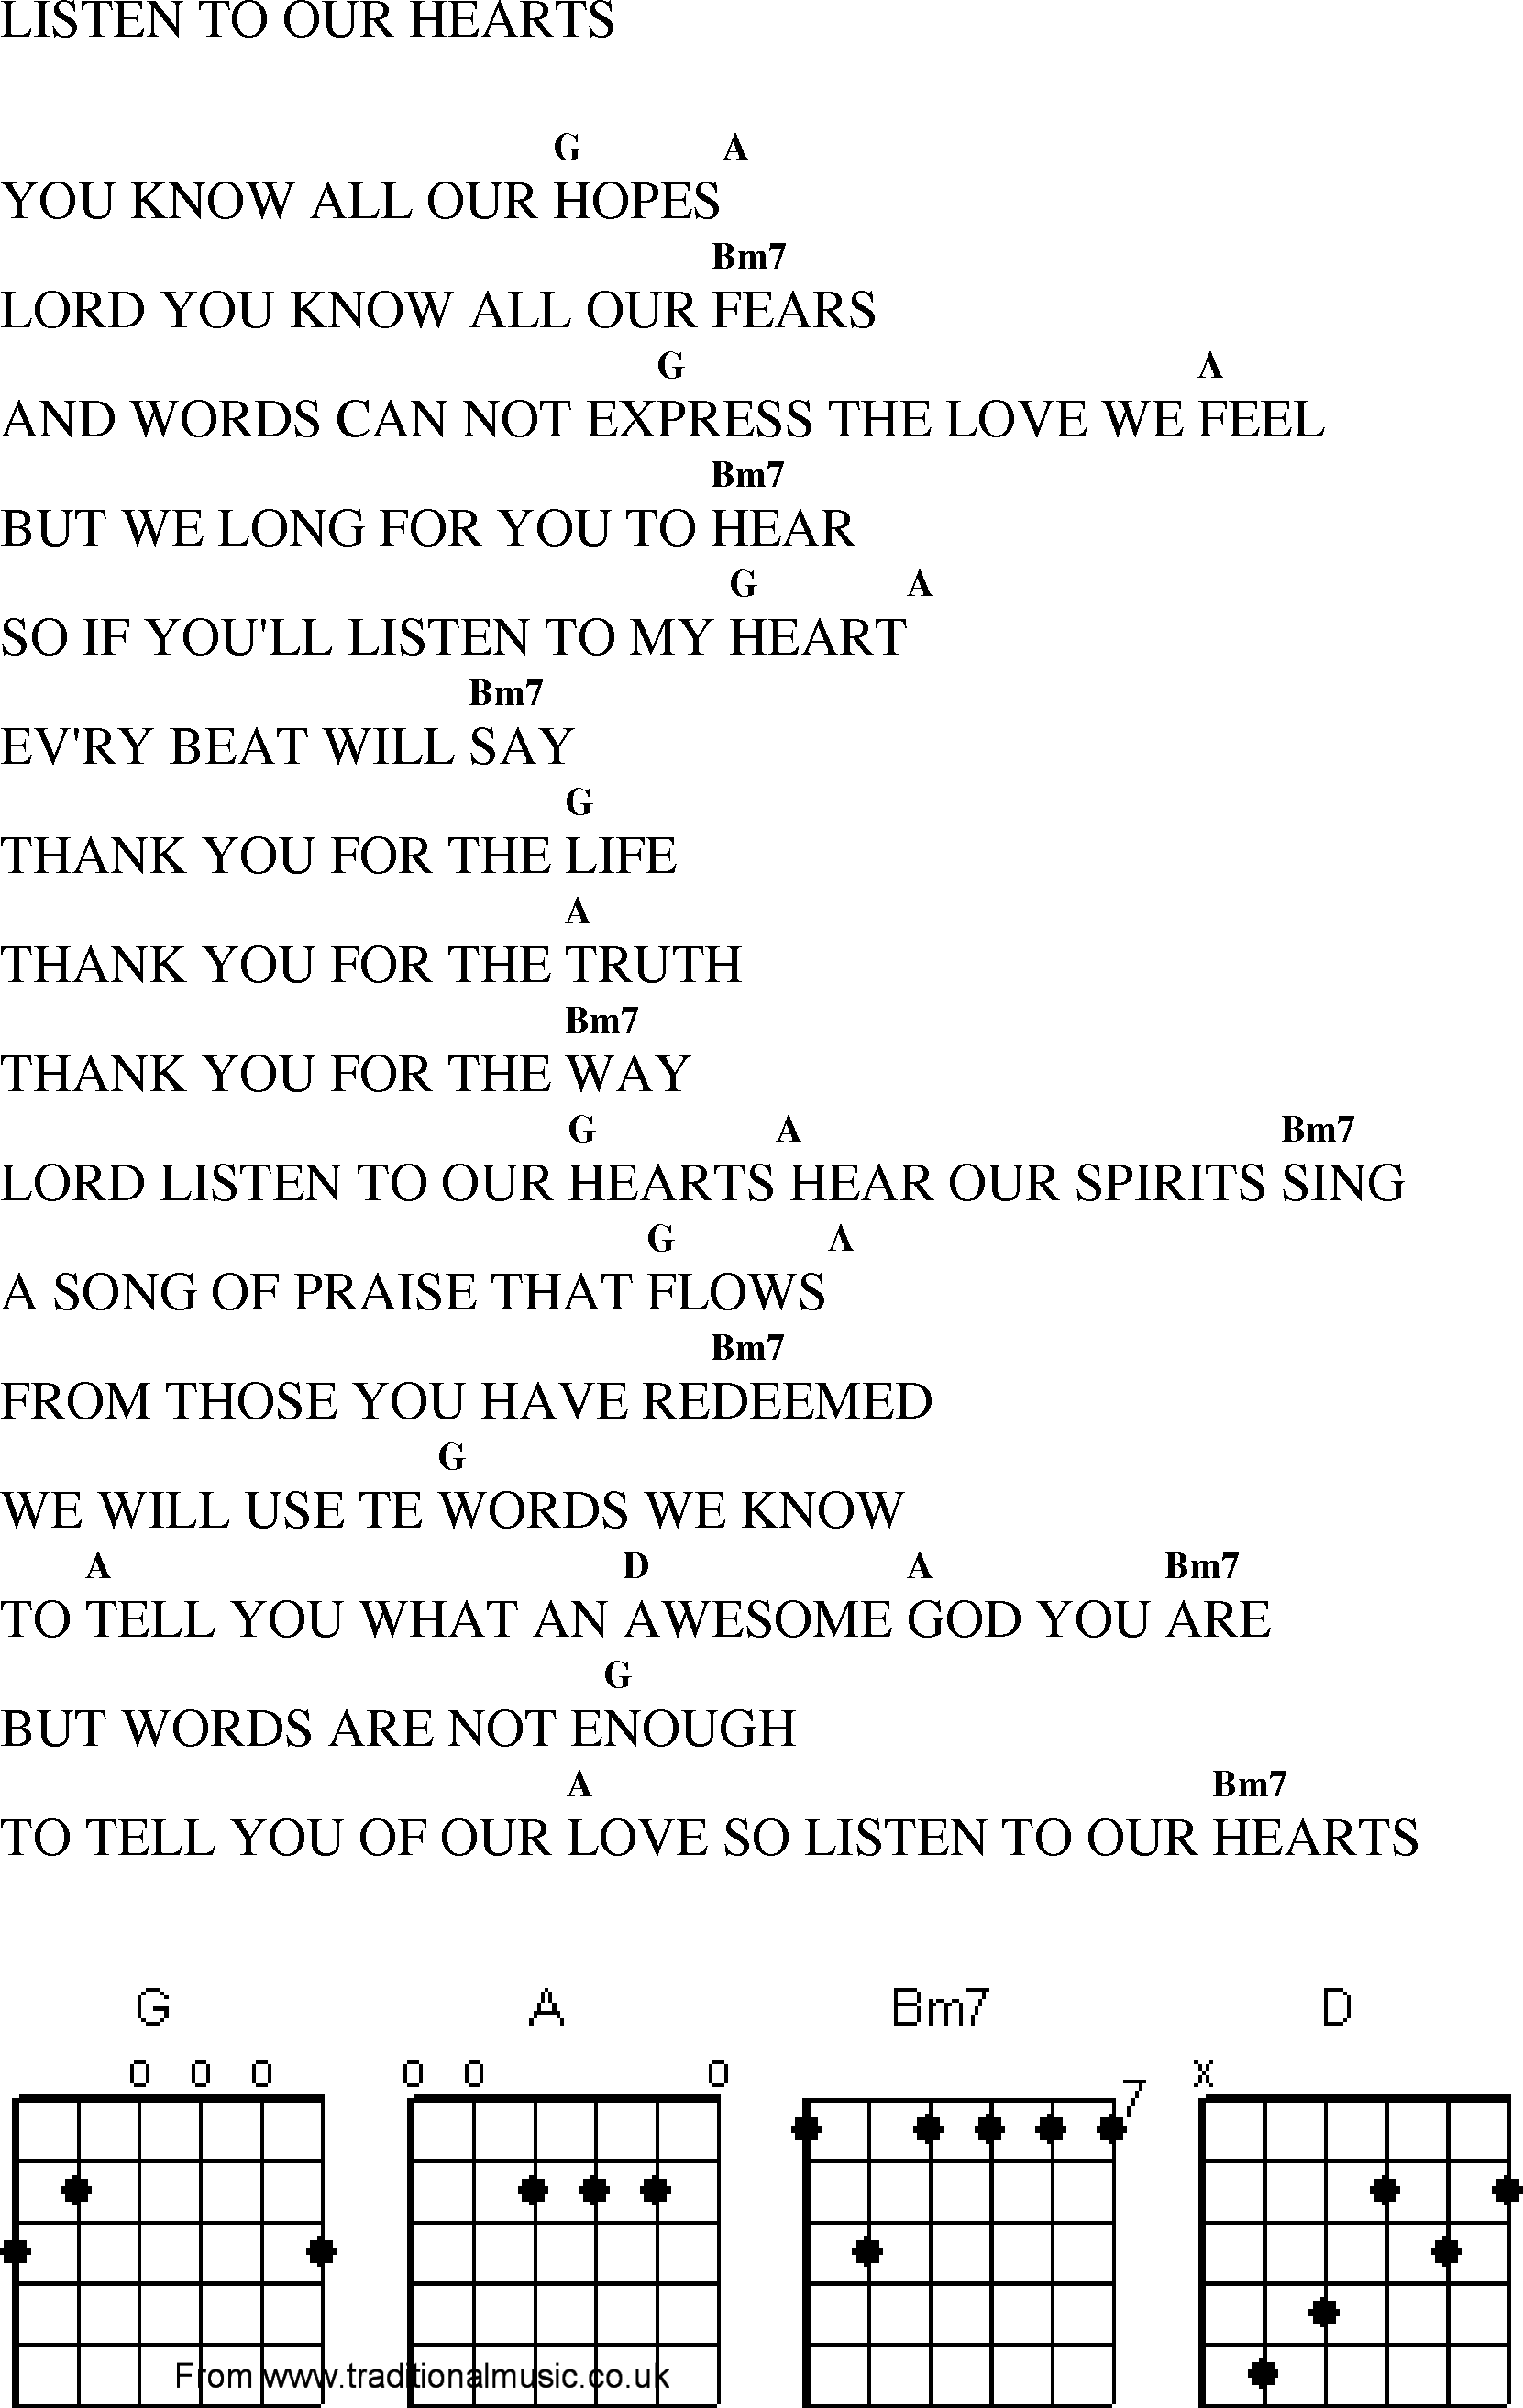 Gospel Song: listen_to_our_hearts, lyrics and chords.